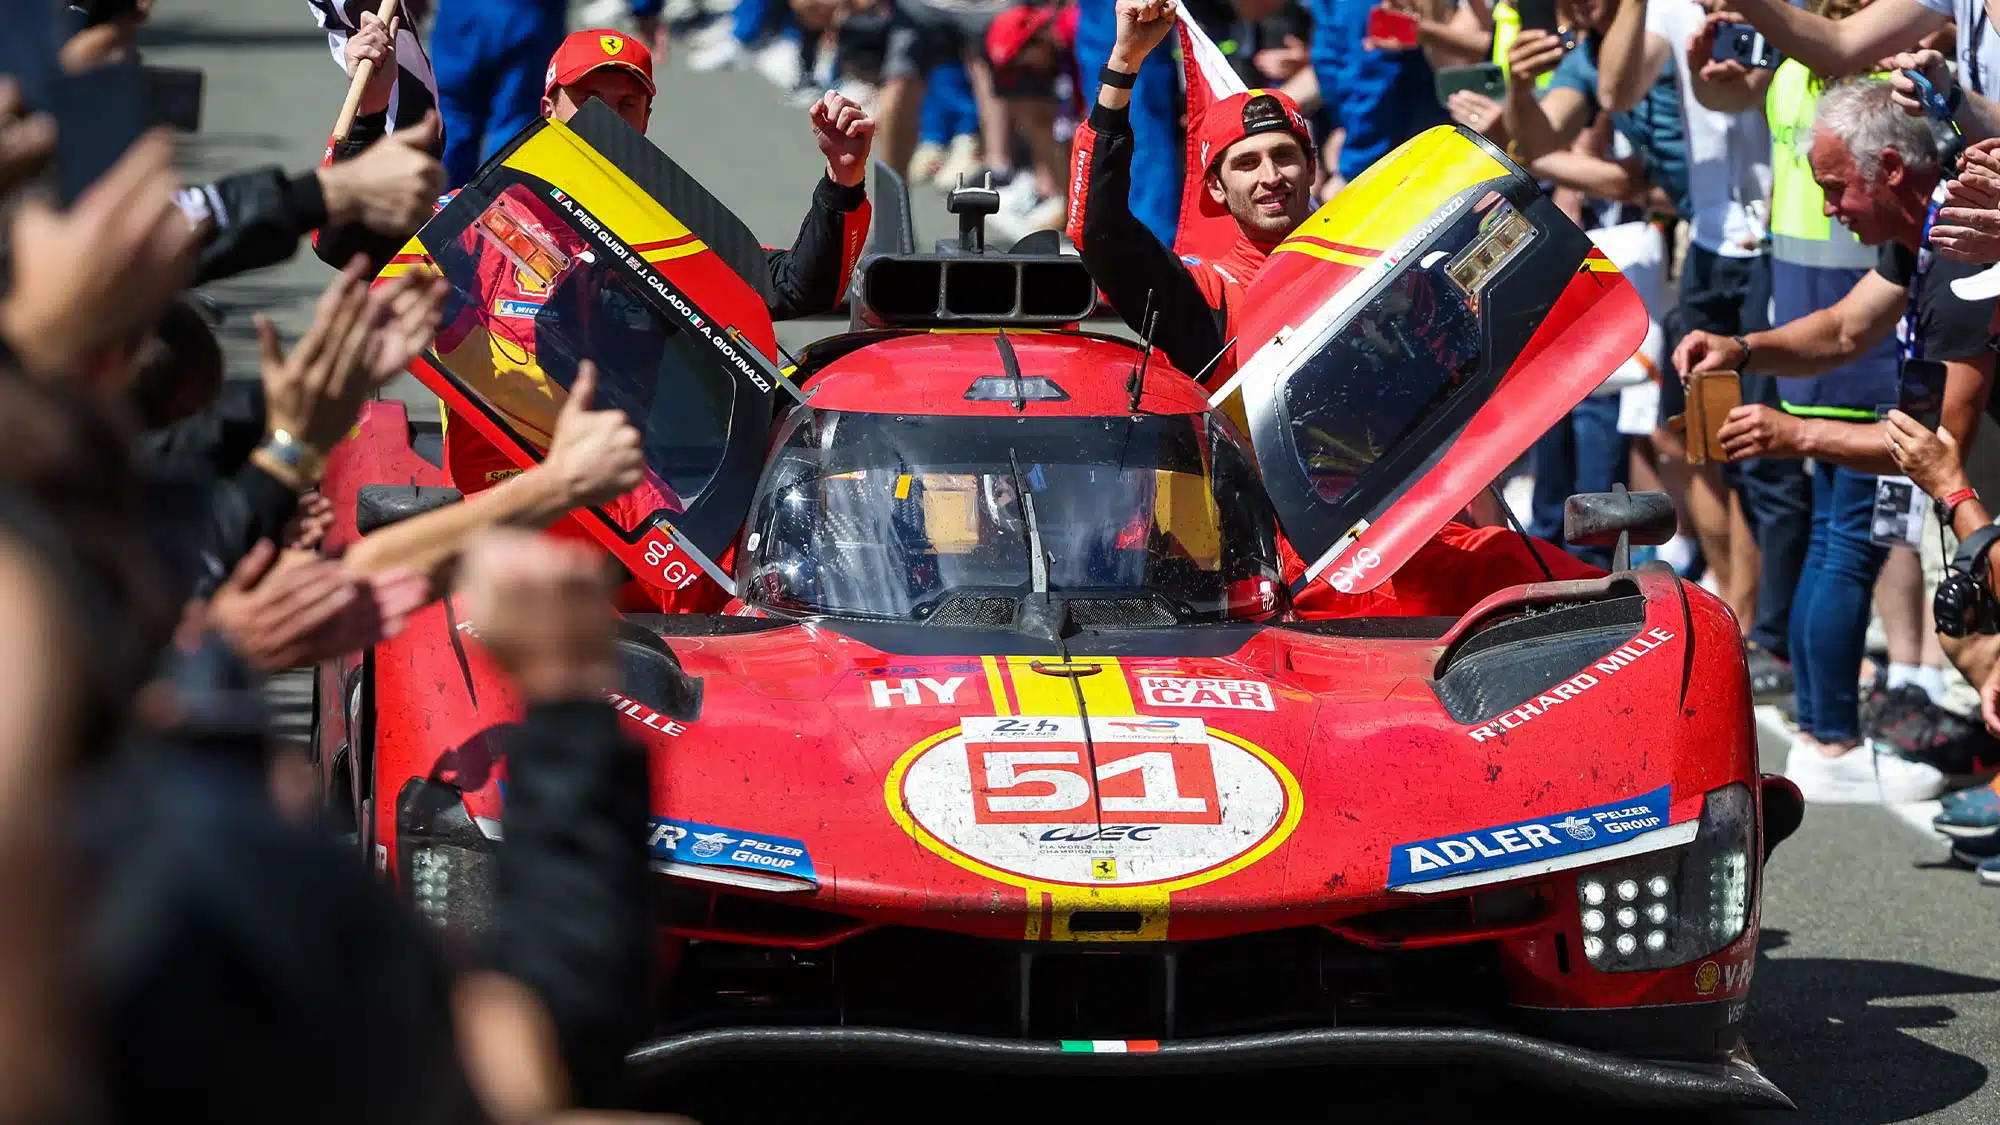 Press Review Italian media reacts to Le Mans result "The Ferrari